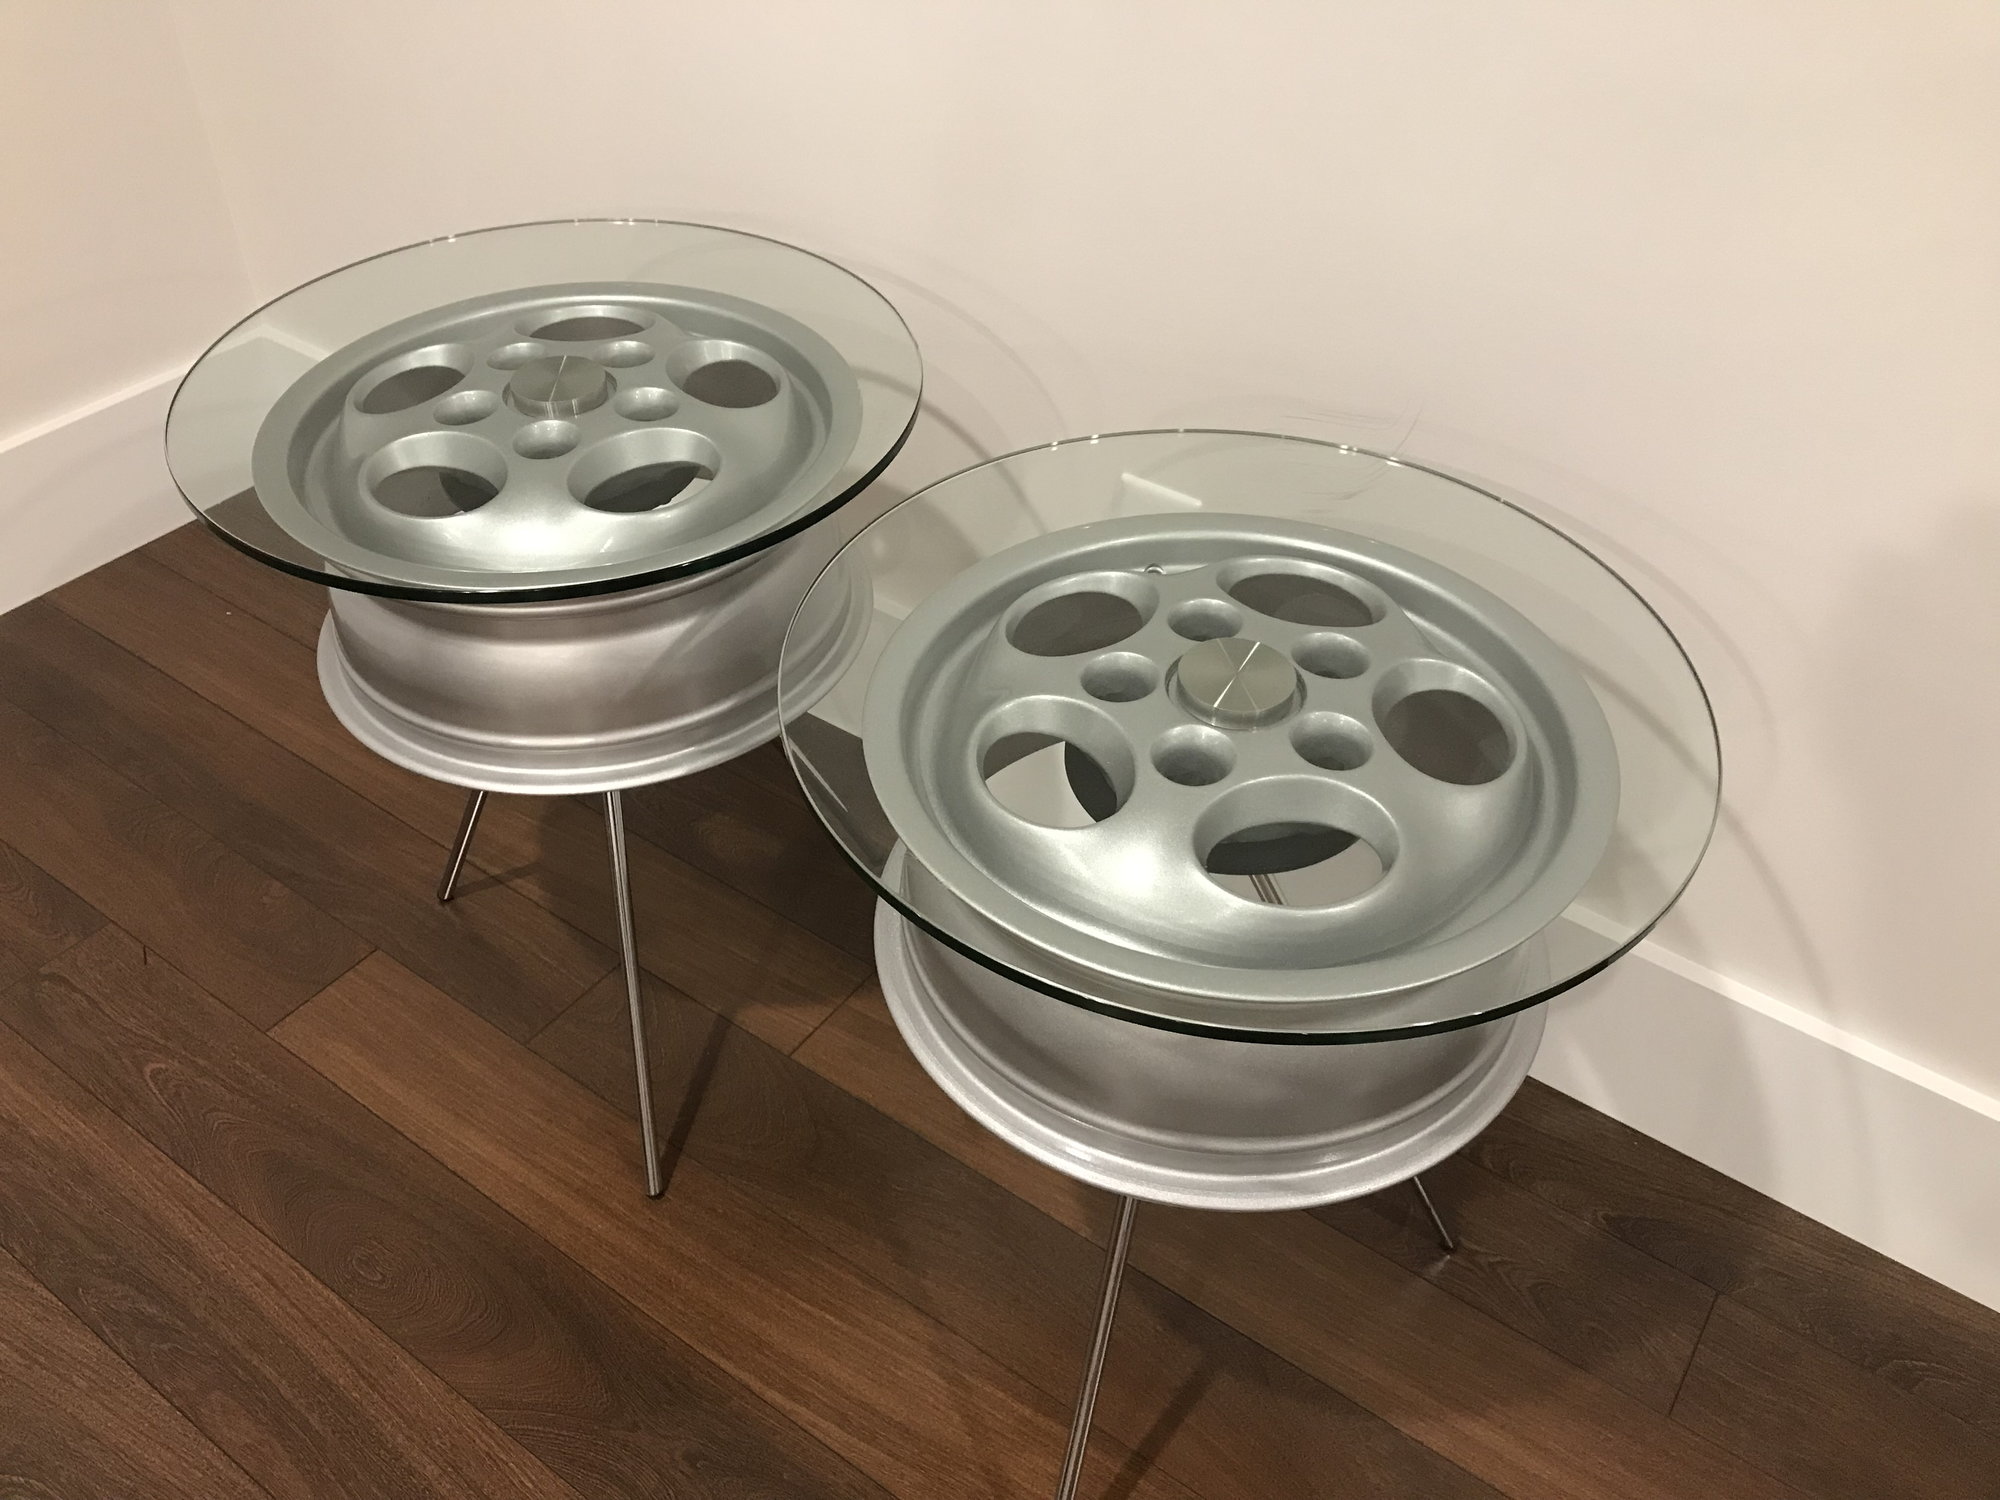 Miscellaneous - (2) Custom Porsche Phonedial Wheel Tables - New - All Years  All Models - Winston Salem, NC 27127, United States